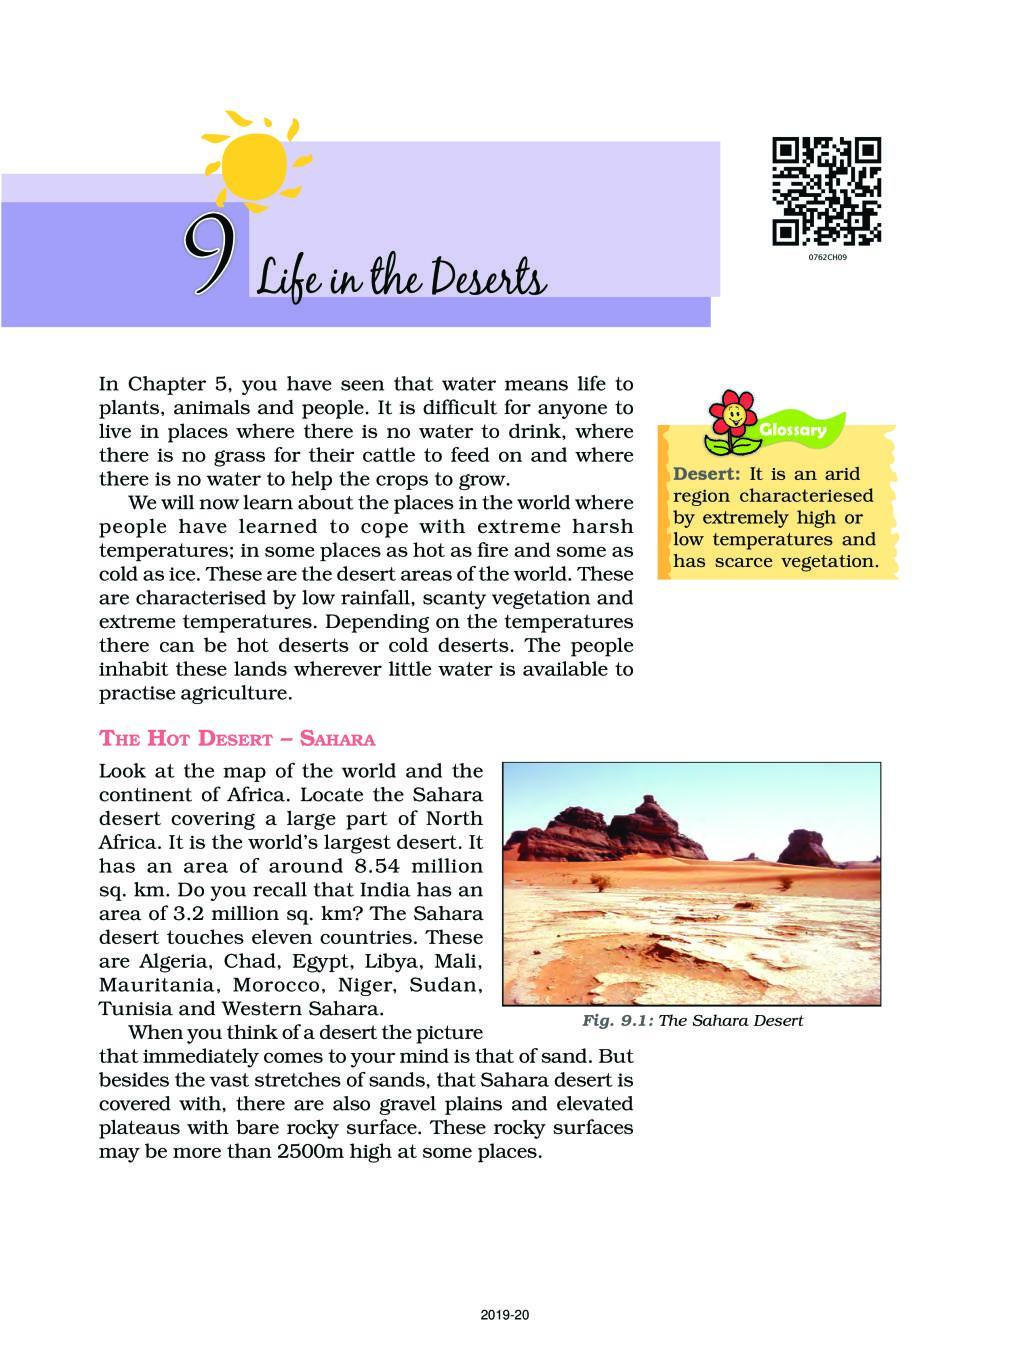 NCERT Book Class 7 Social Science (Geography) Chapter 9 Life in the Deserts - Page 1